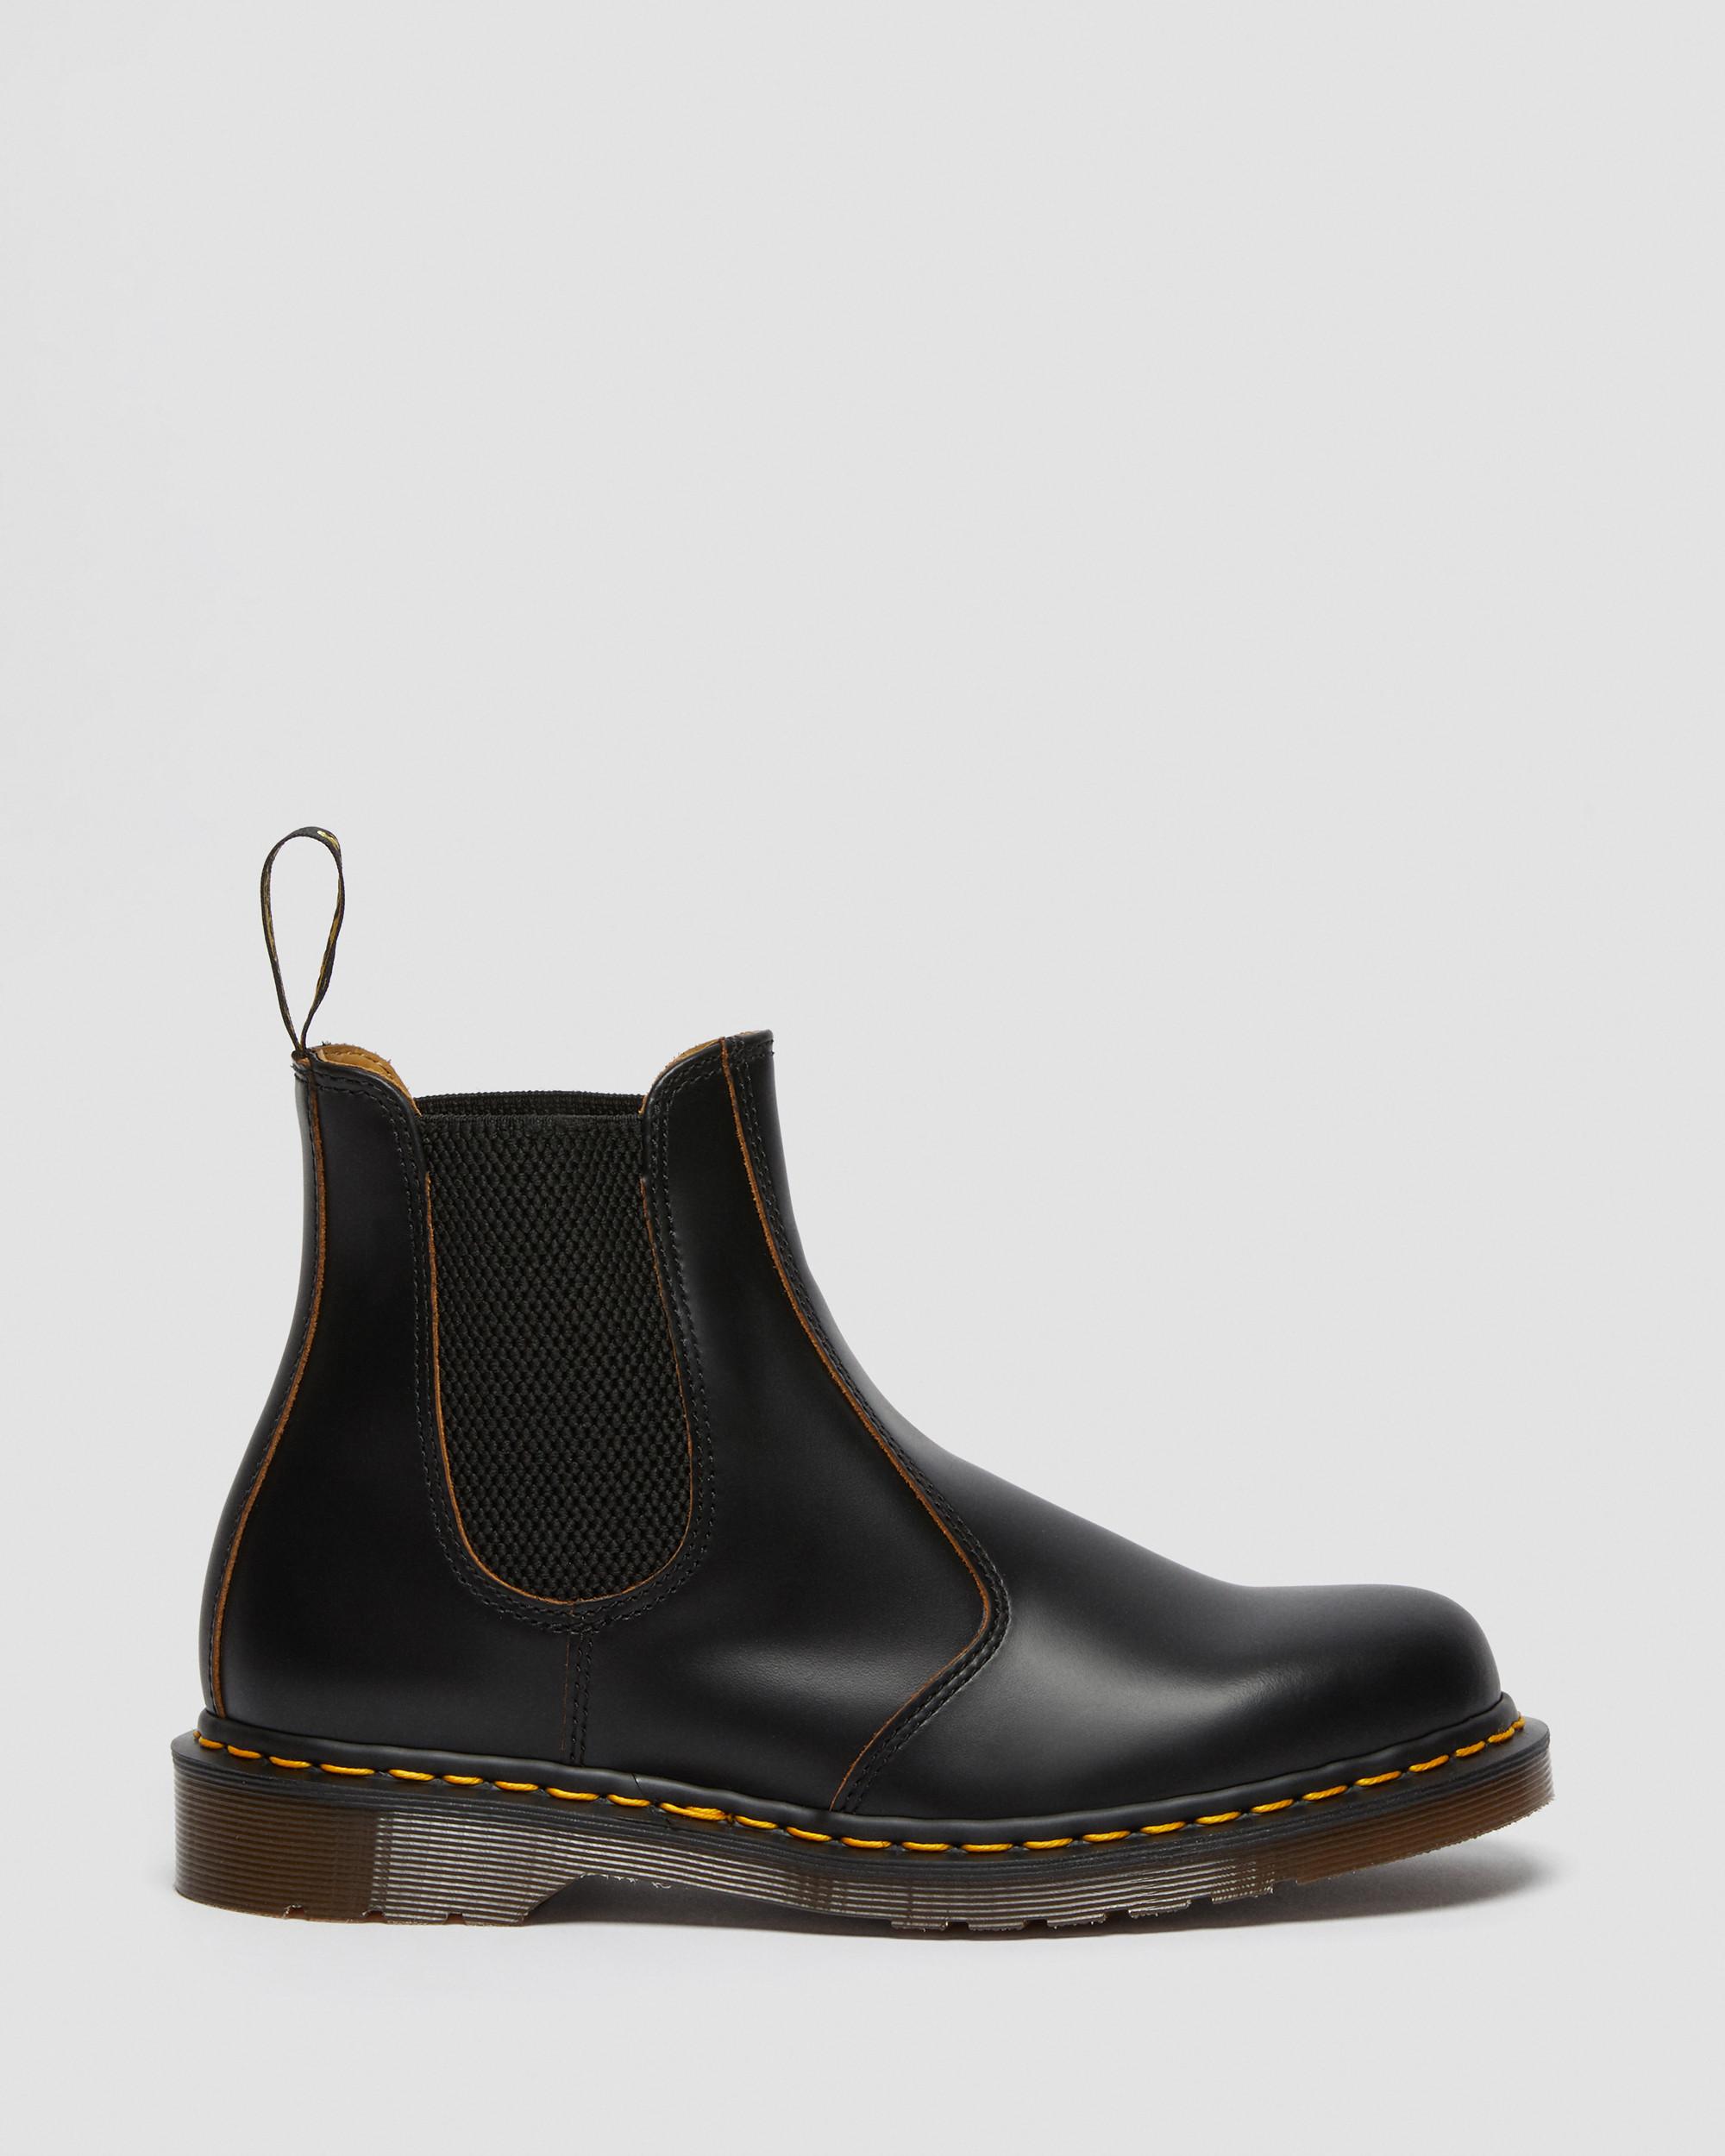 2976 Vintage Made in England Chelsea Boots2976 Vintage Made in England Chelsea Boots Dr. Martens